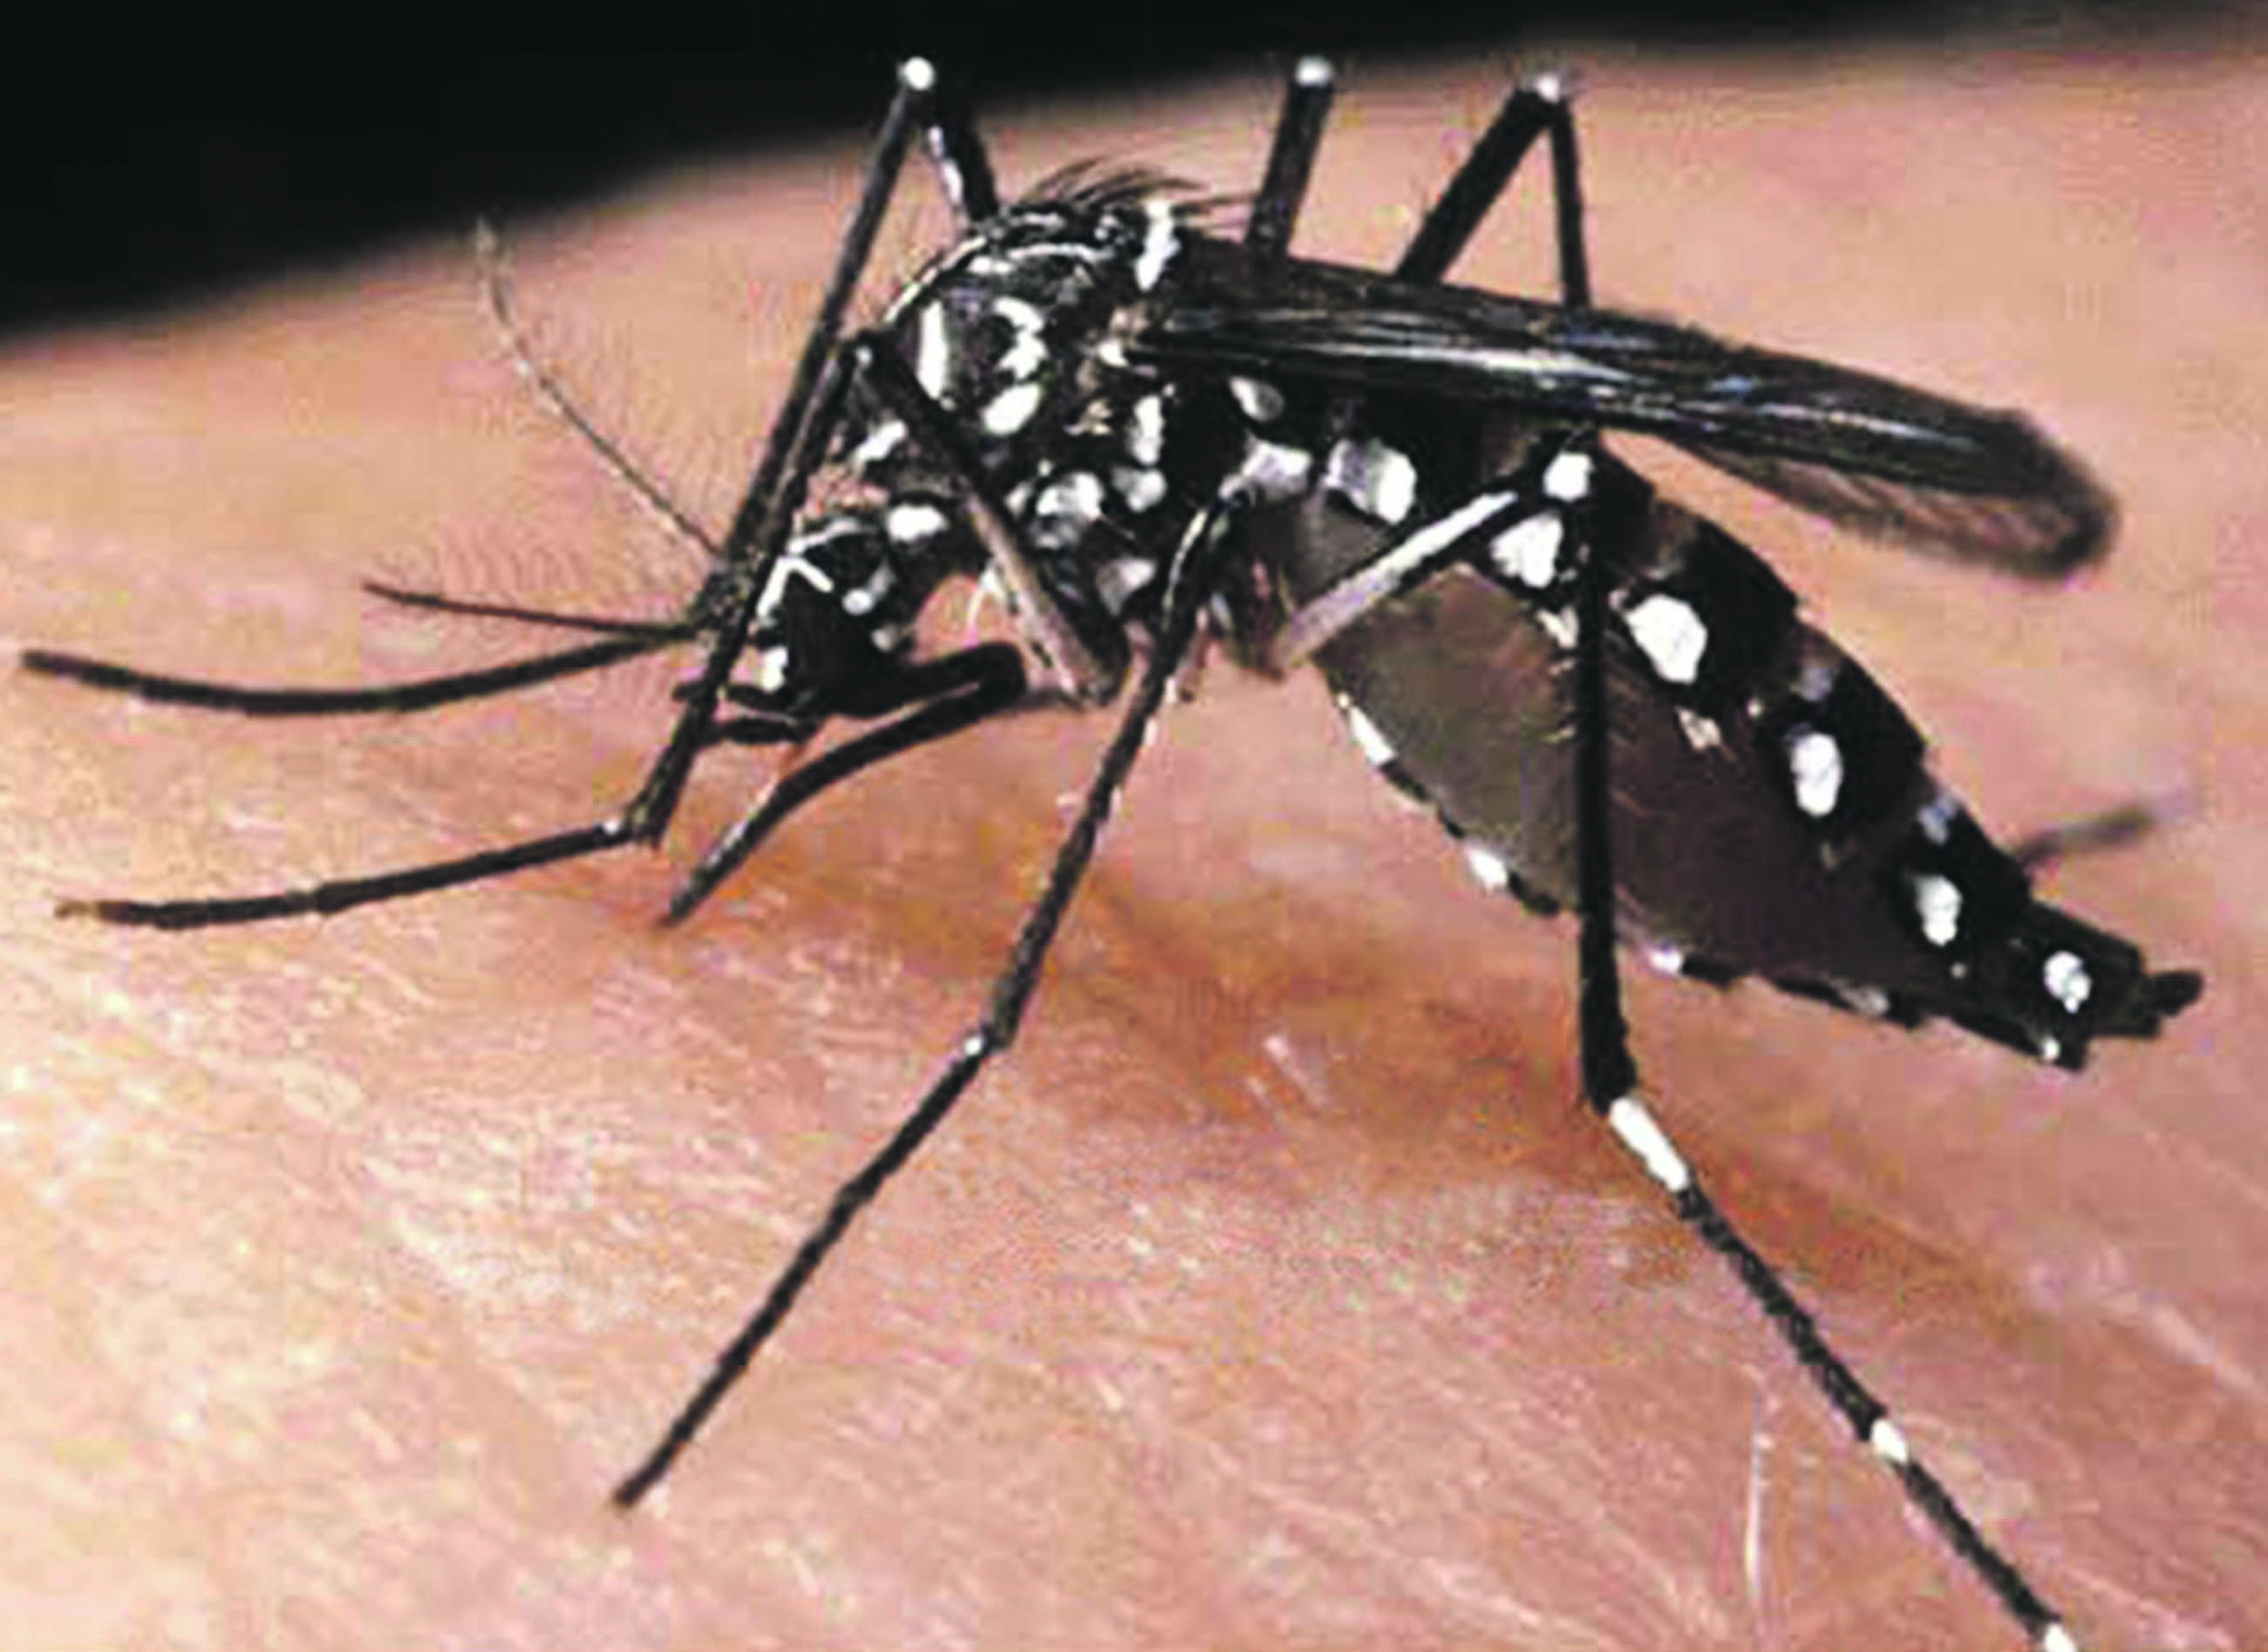 http://www.myhealth.gov.my/wp-content/uploads/page-1-Aedes-Aegypti-mosquito.jpg